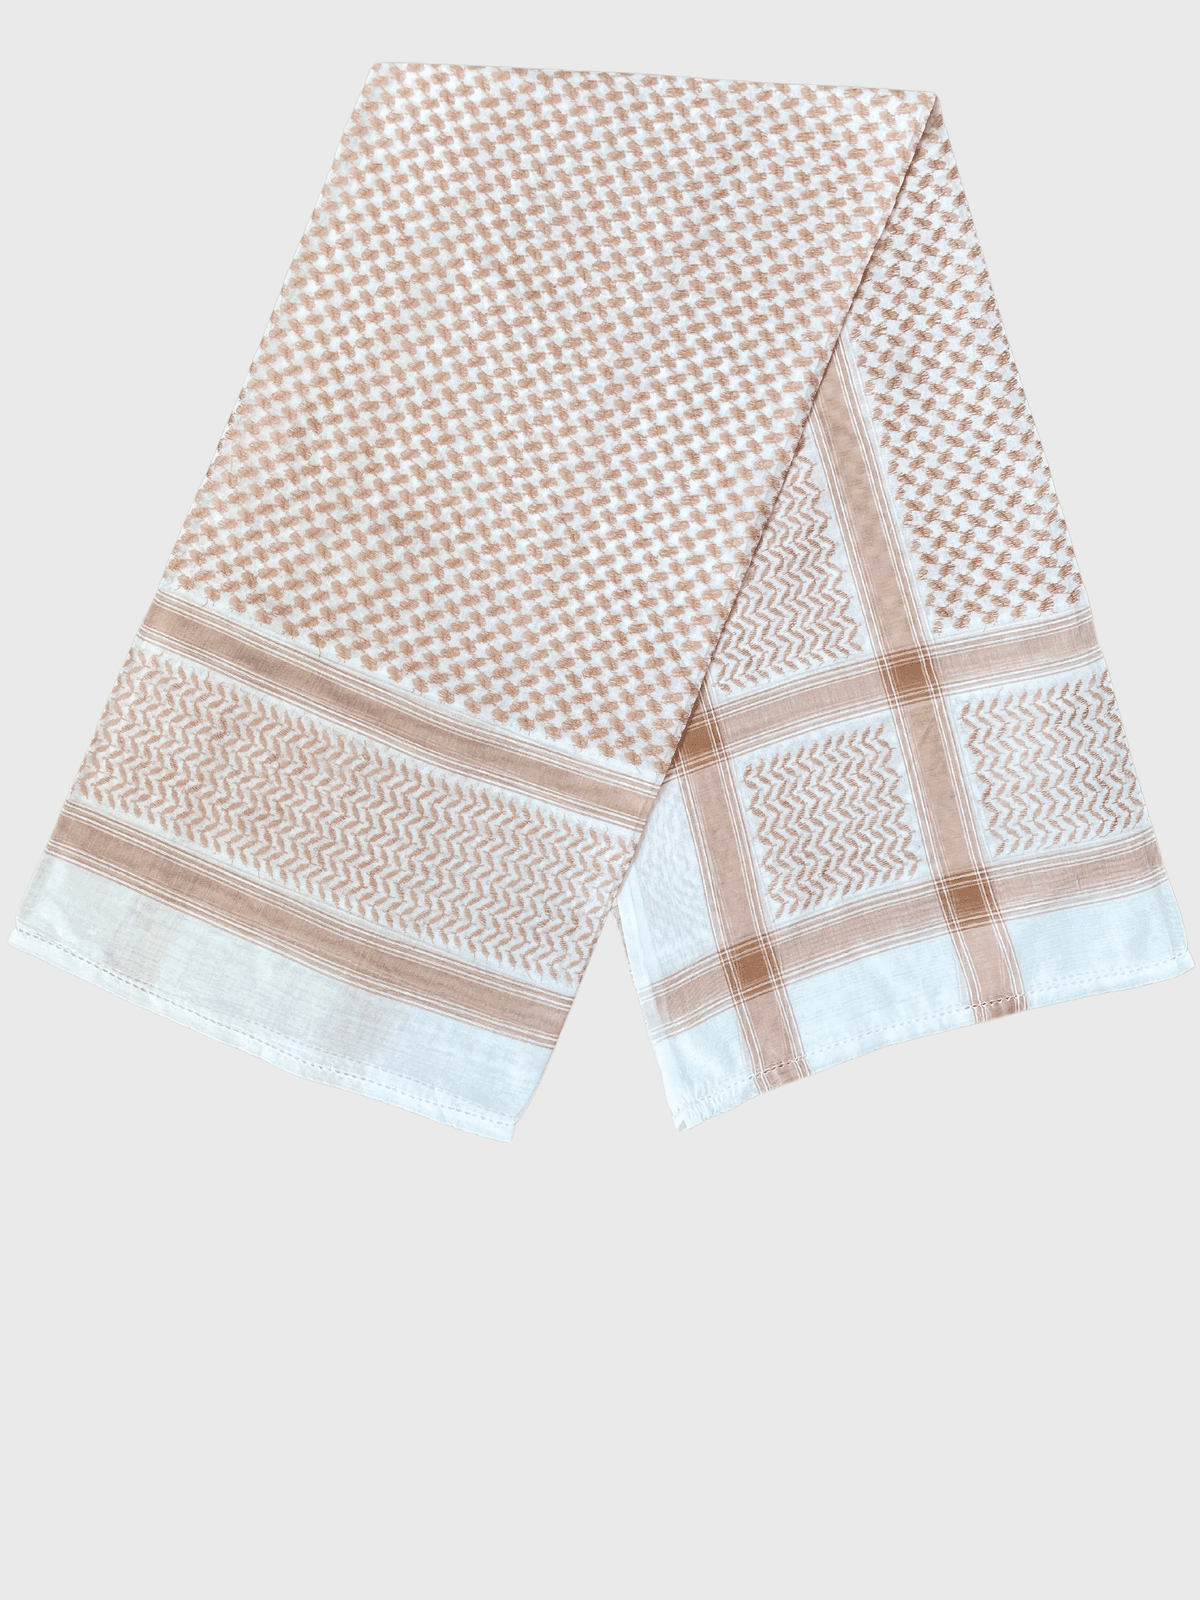 Mens Beige Pink and White Keffiyeh Shemagh Scarf, Arab Scarf